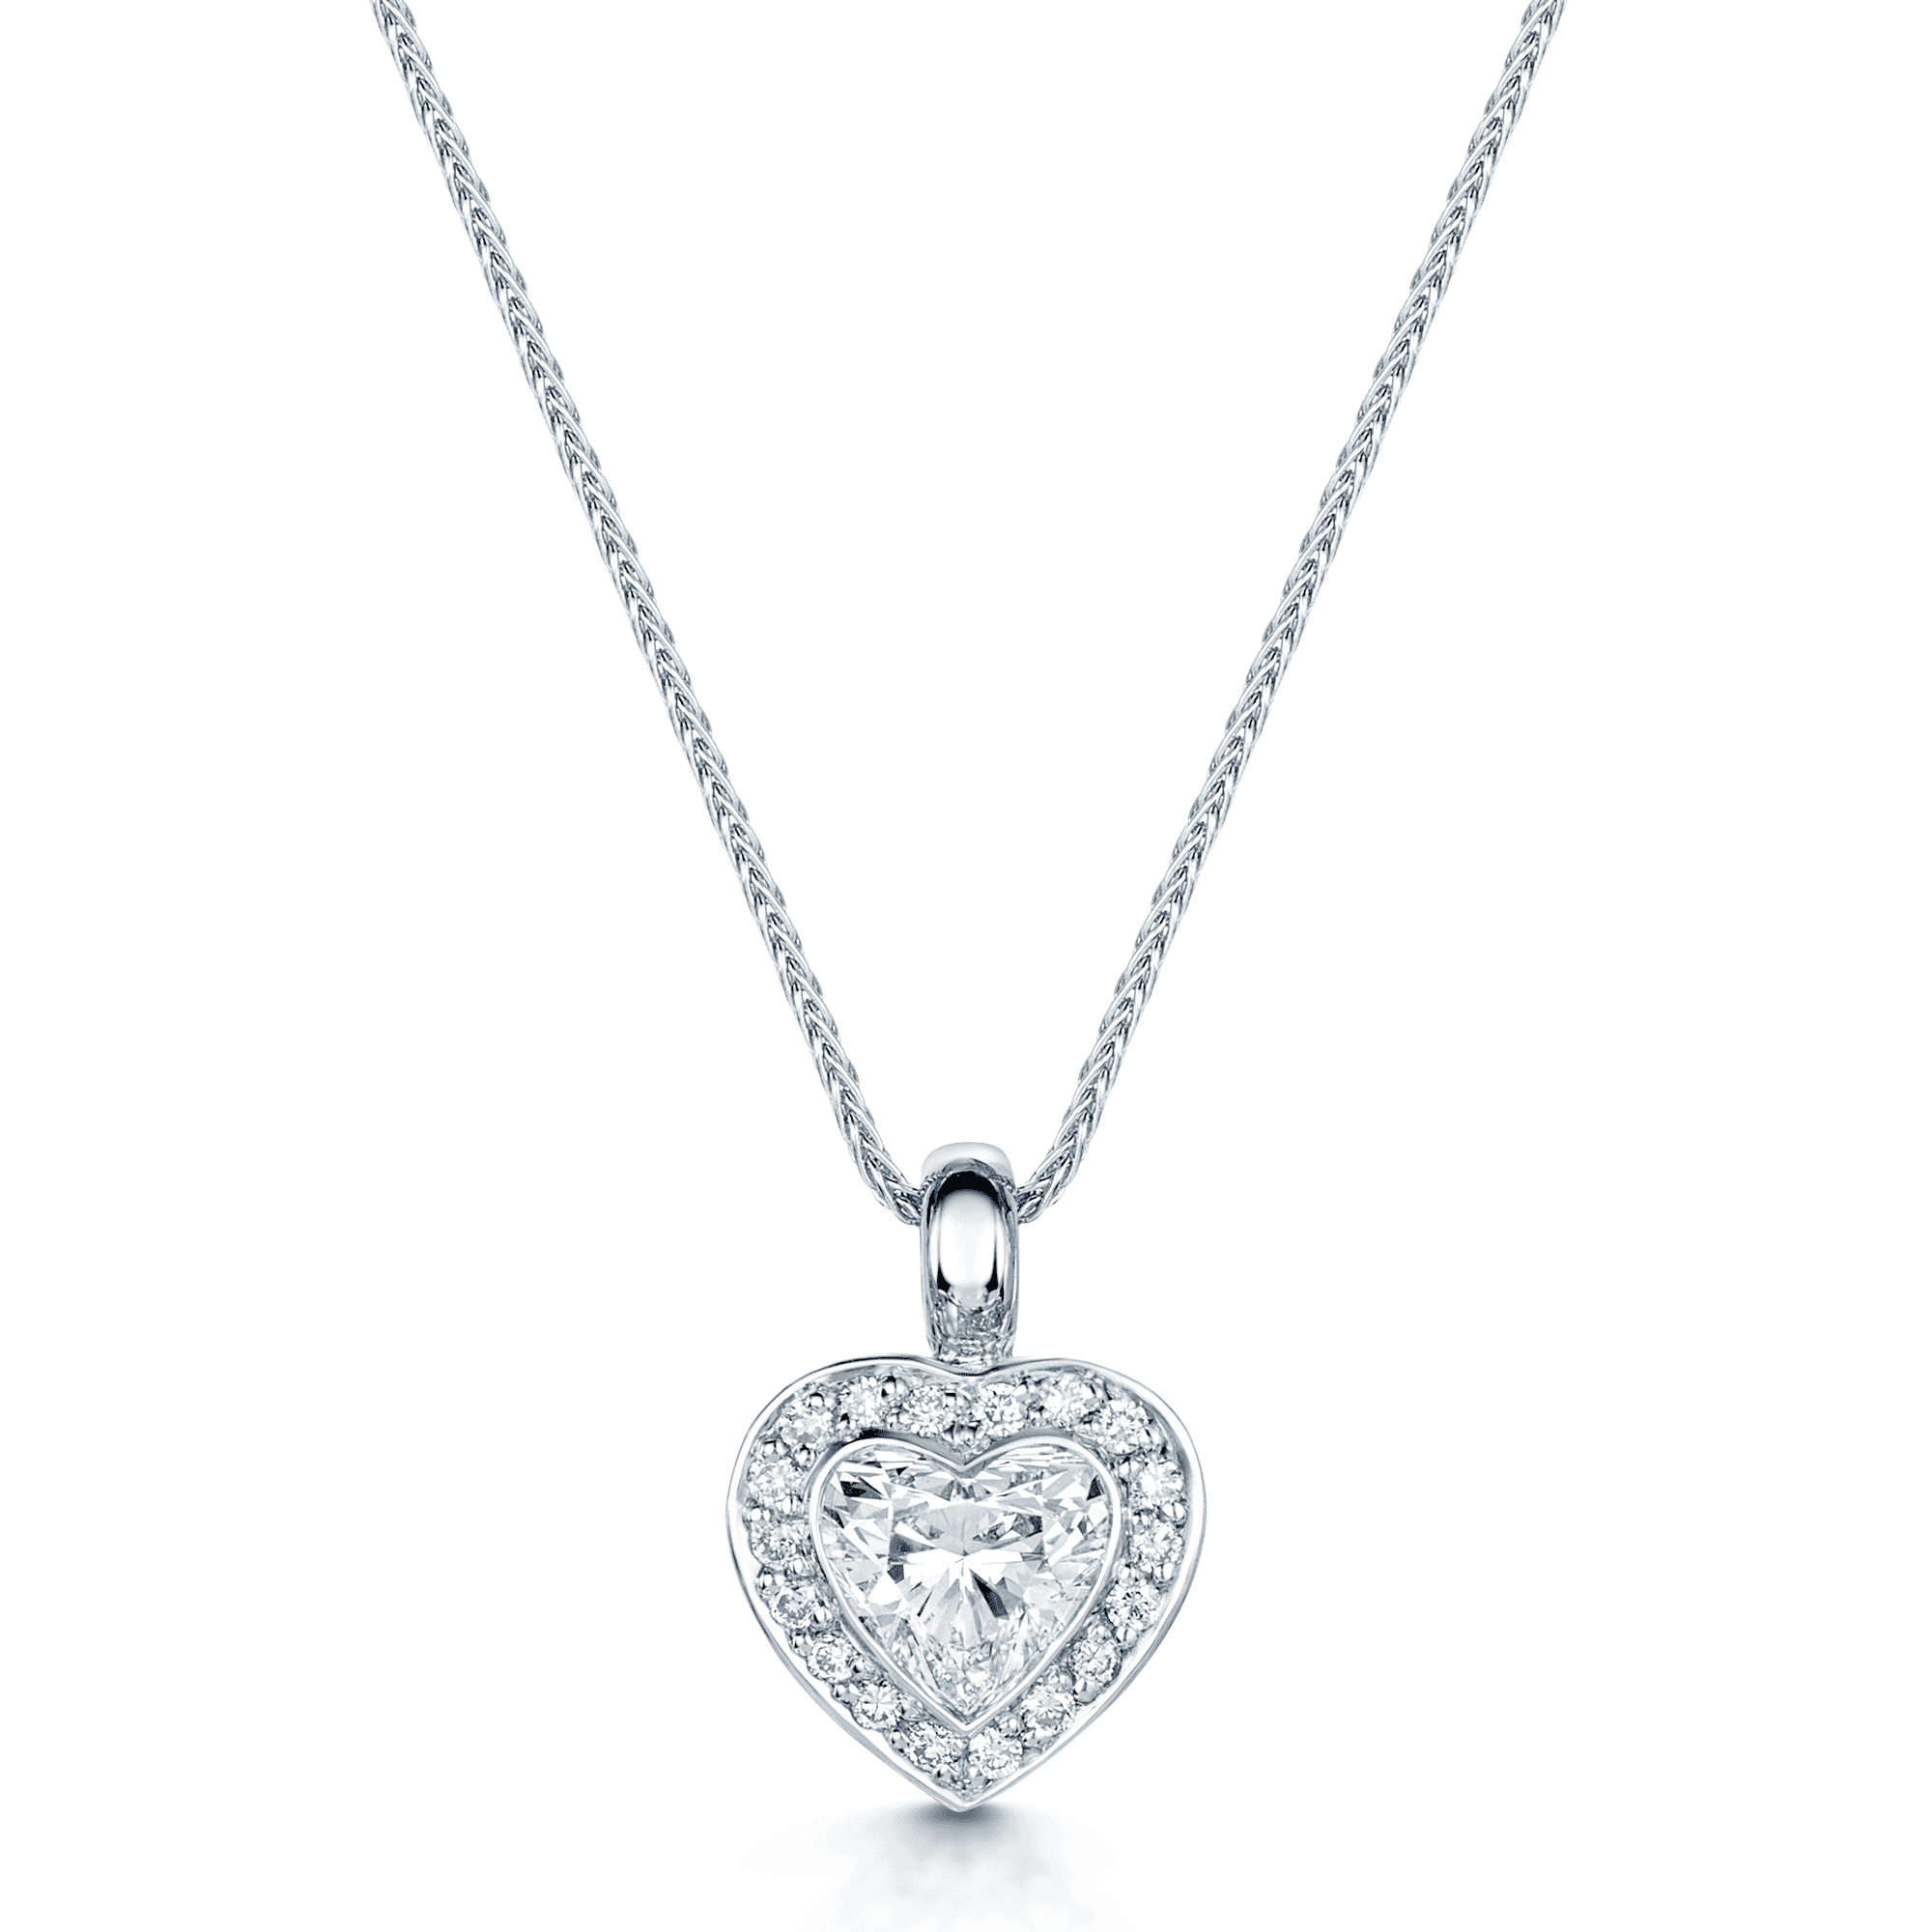 18ct White Gold Heart Shaped Diamond Pendant in a Pave Set Surround